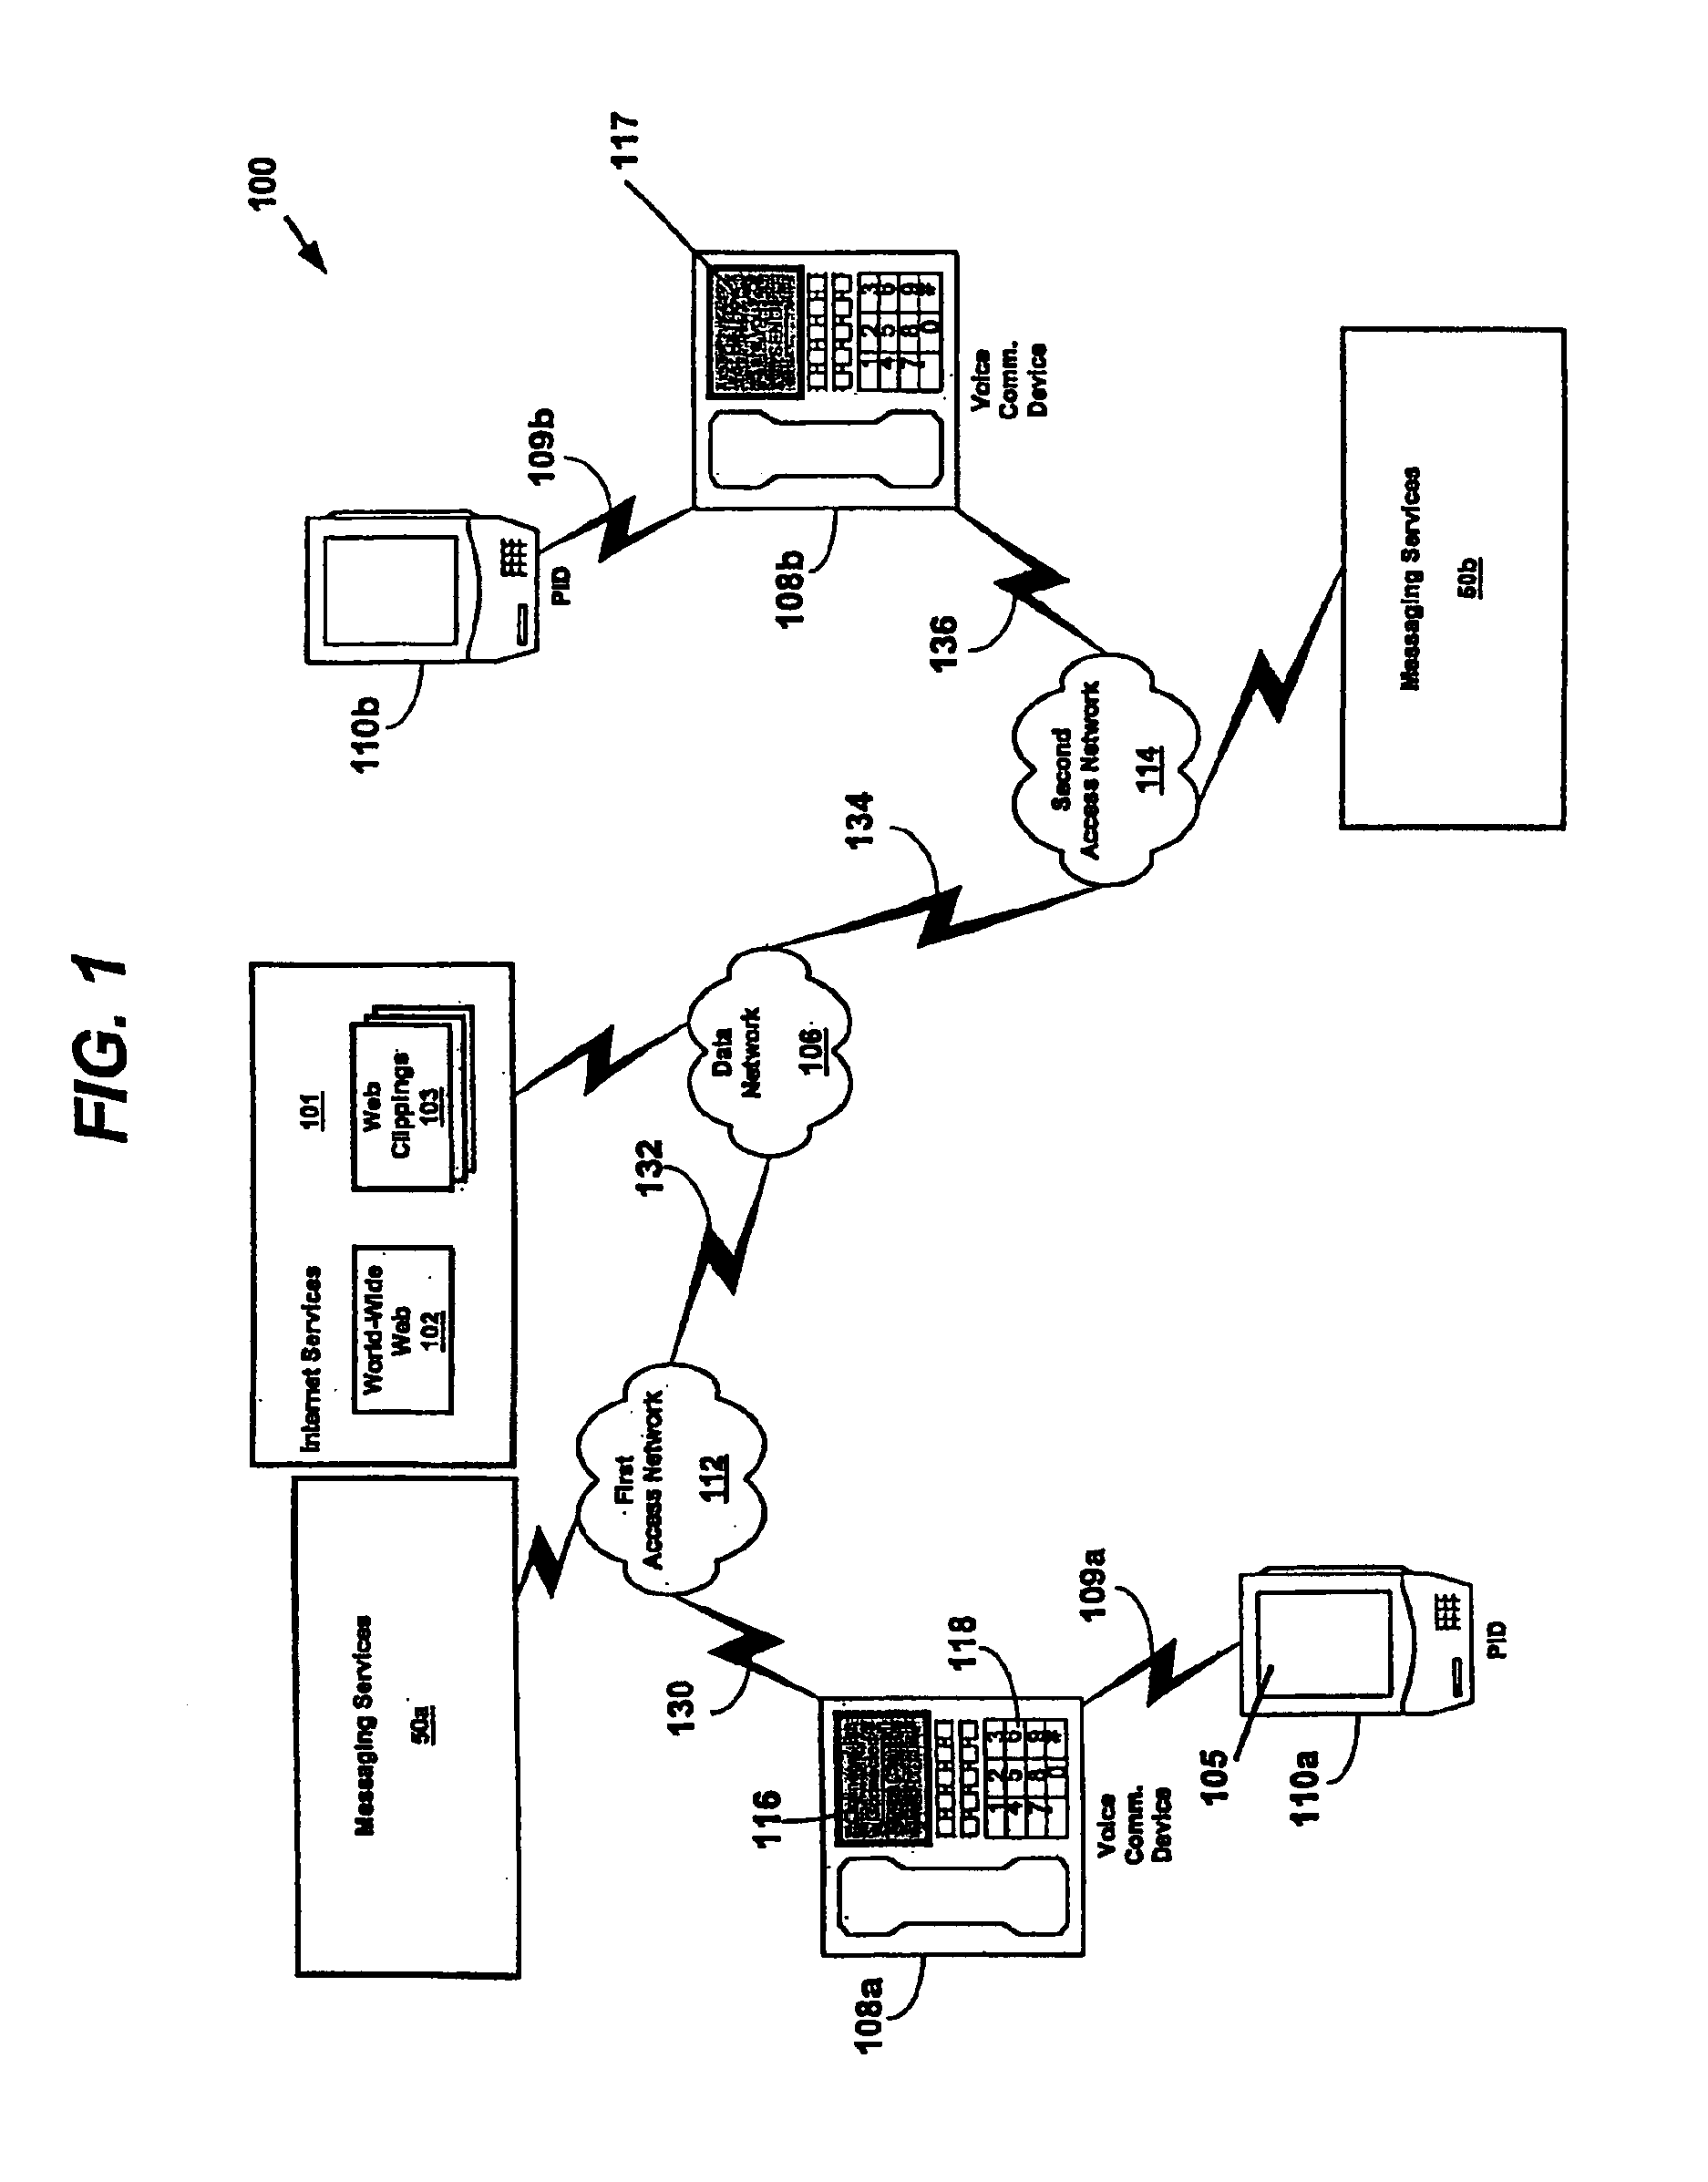 System and method for performing messaging services using a data communications channel in a data network telephone system